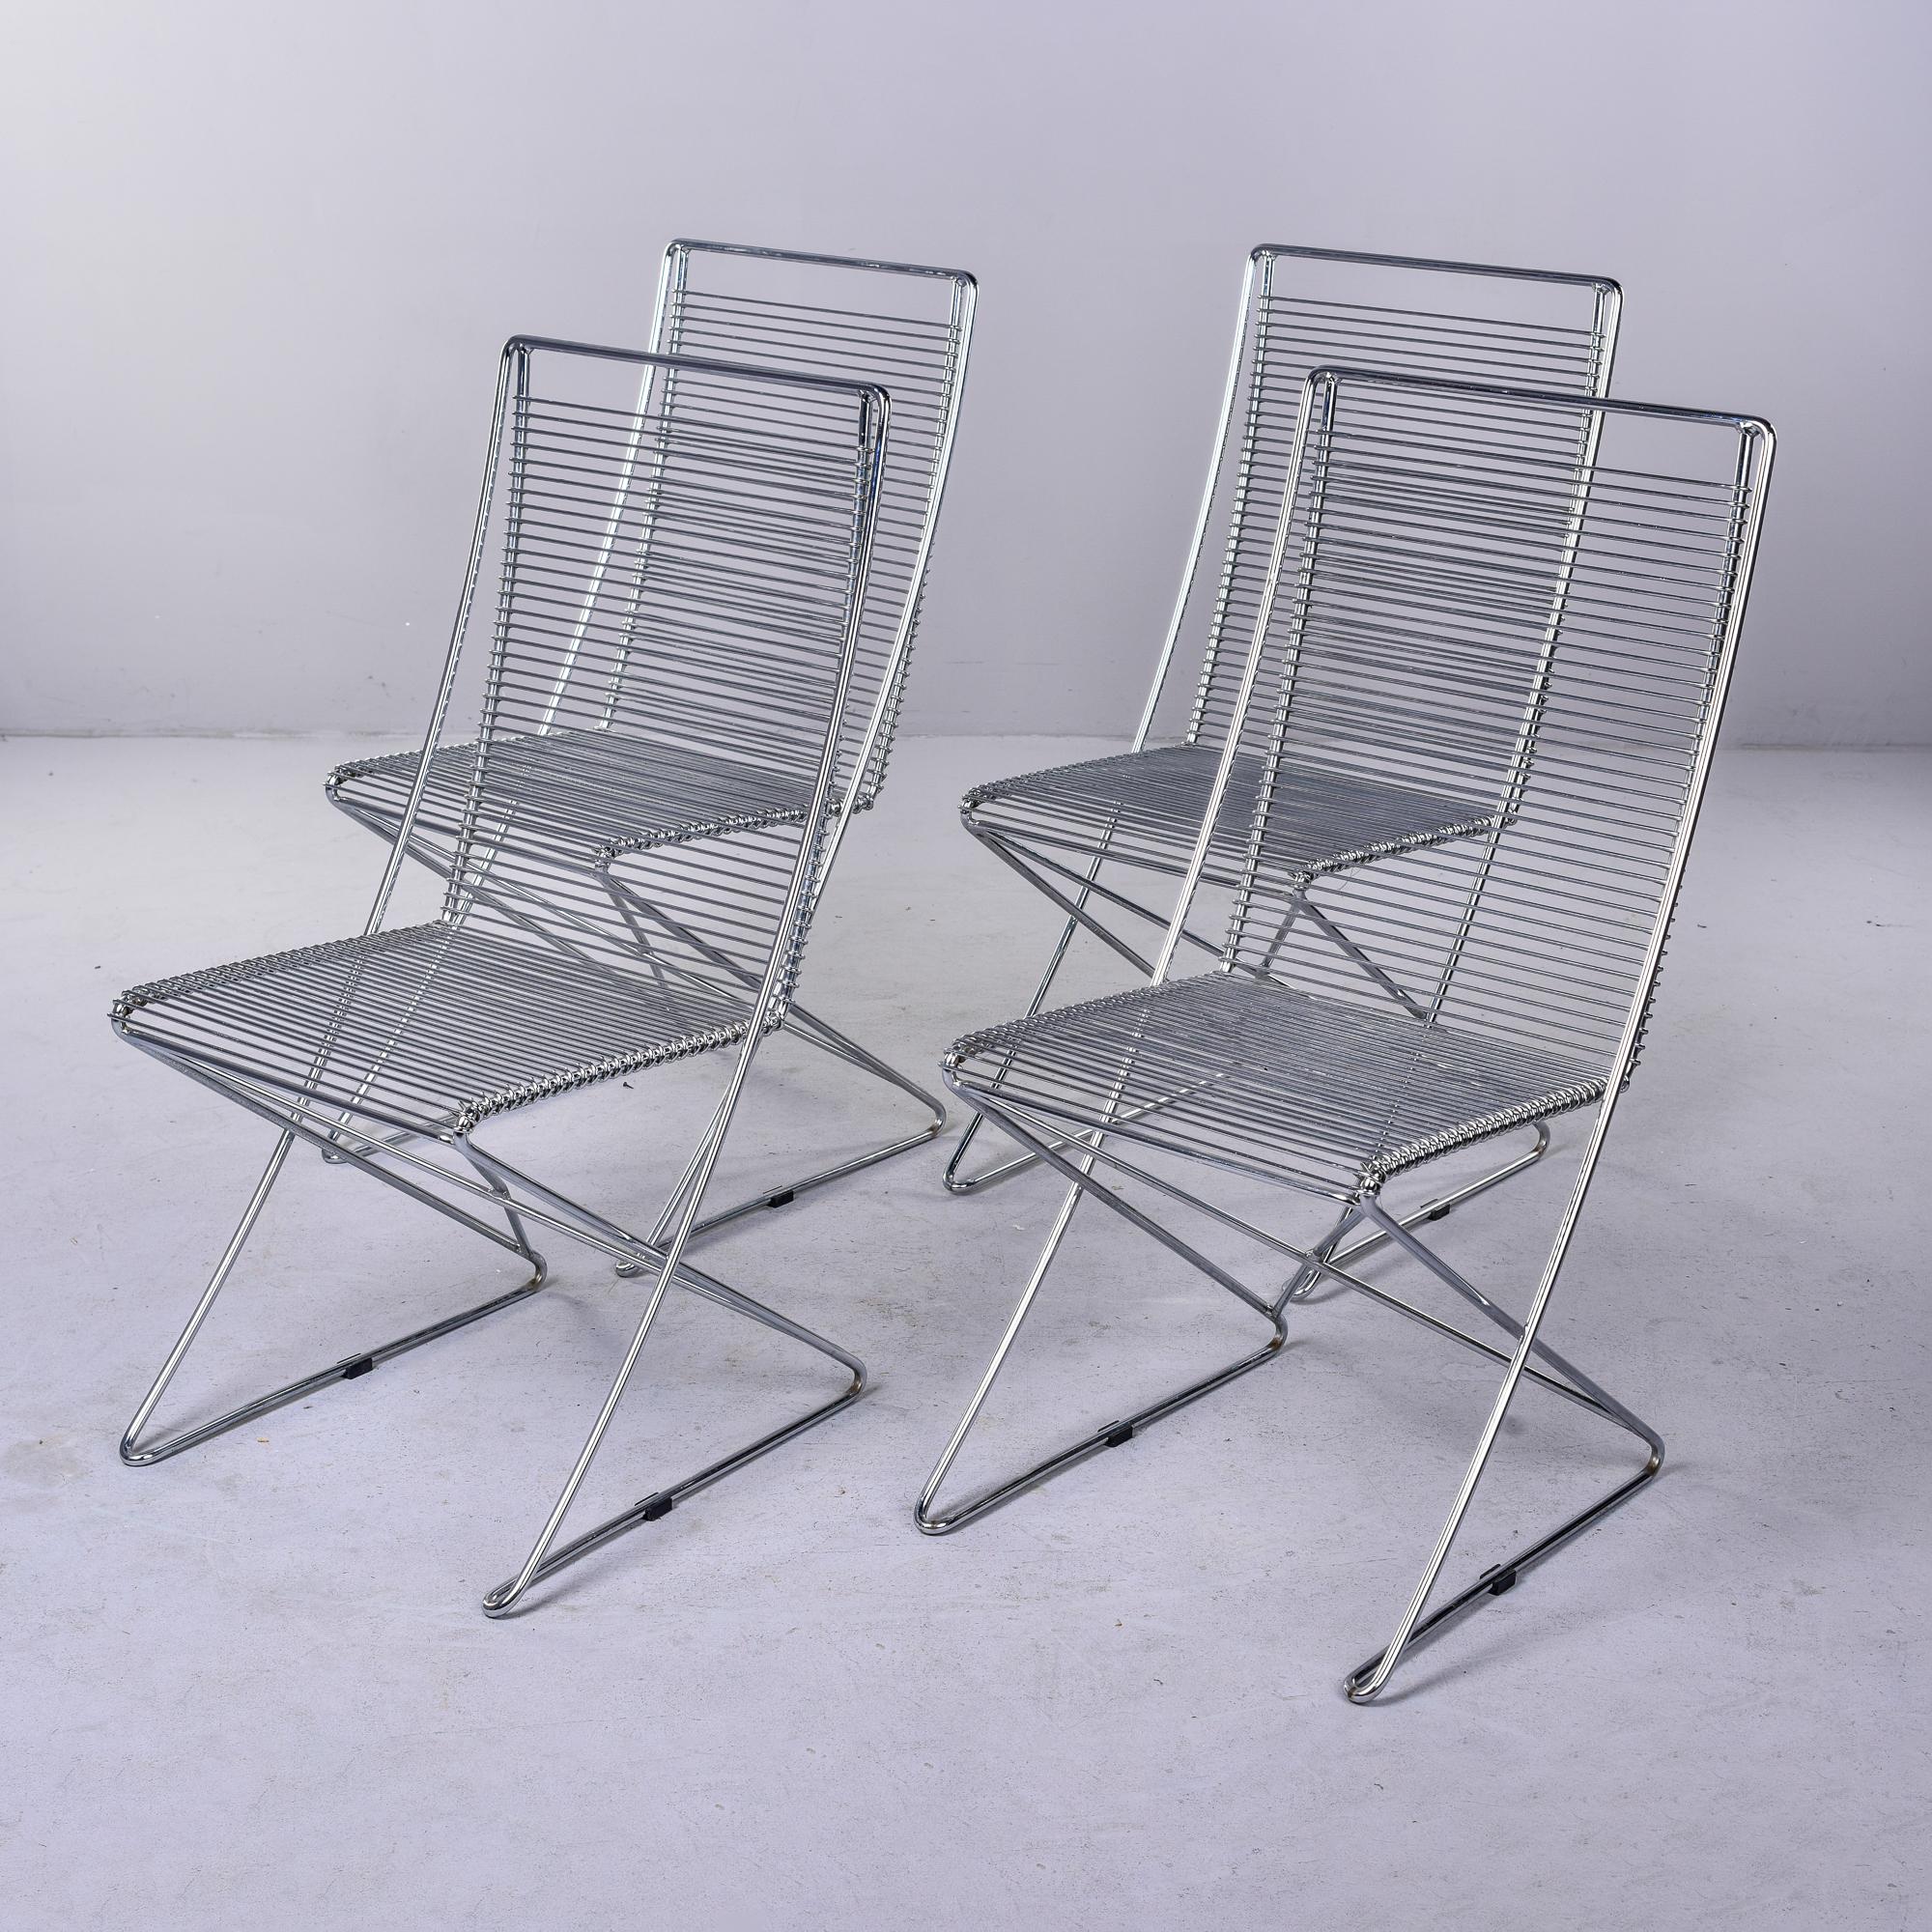 Circa 1980s set of four German Kreuzschwinger chairs designed by Till Behrens for Schlubach. These chairs are made entirely of bent and welded steel bars. The unique classic design is surprisingly comfortable and the dynamics of the chair allow it